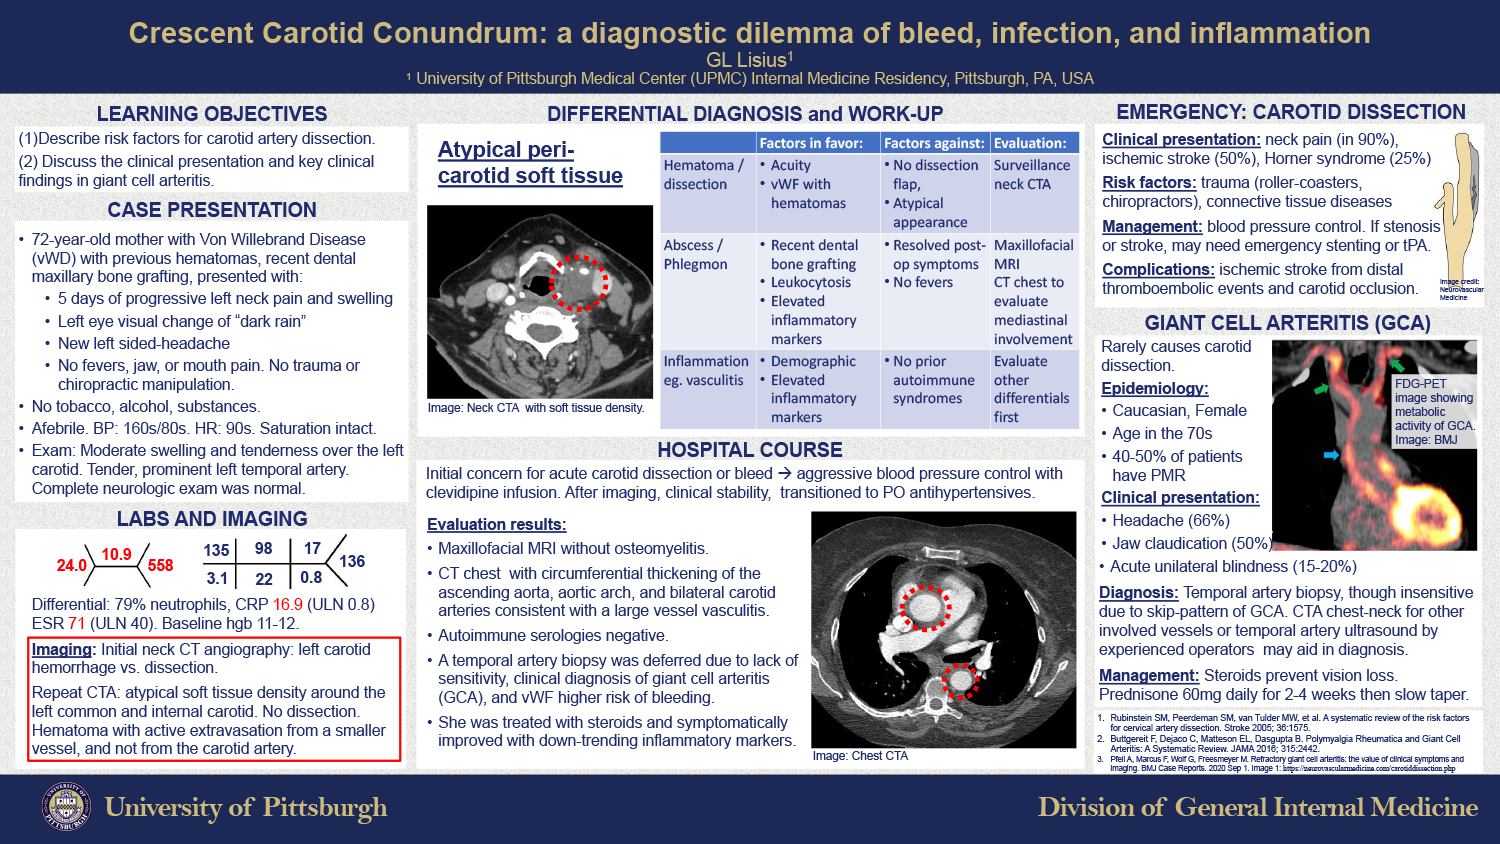 Grace Lisius - PAW-18-Carotid-Crescent-Conundrum-Diagnostic-Dilemma-of-Bleed-Infection-Inflammation